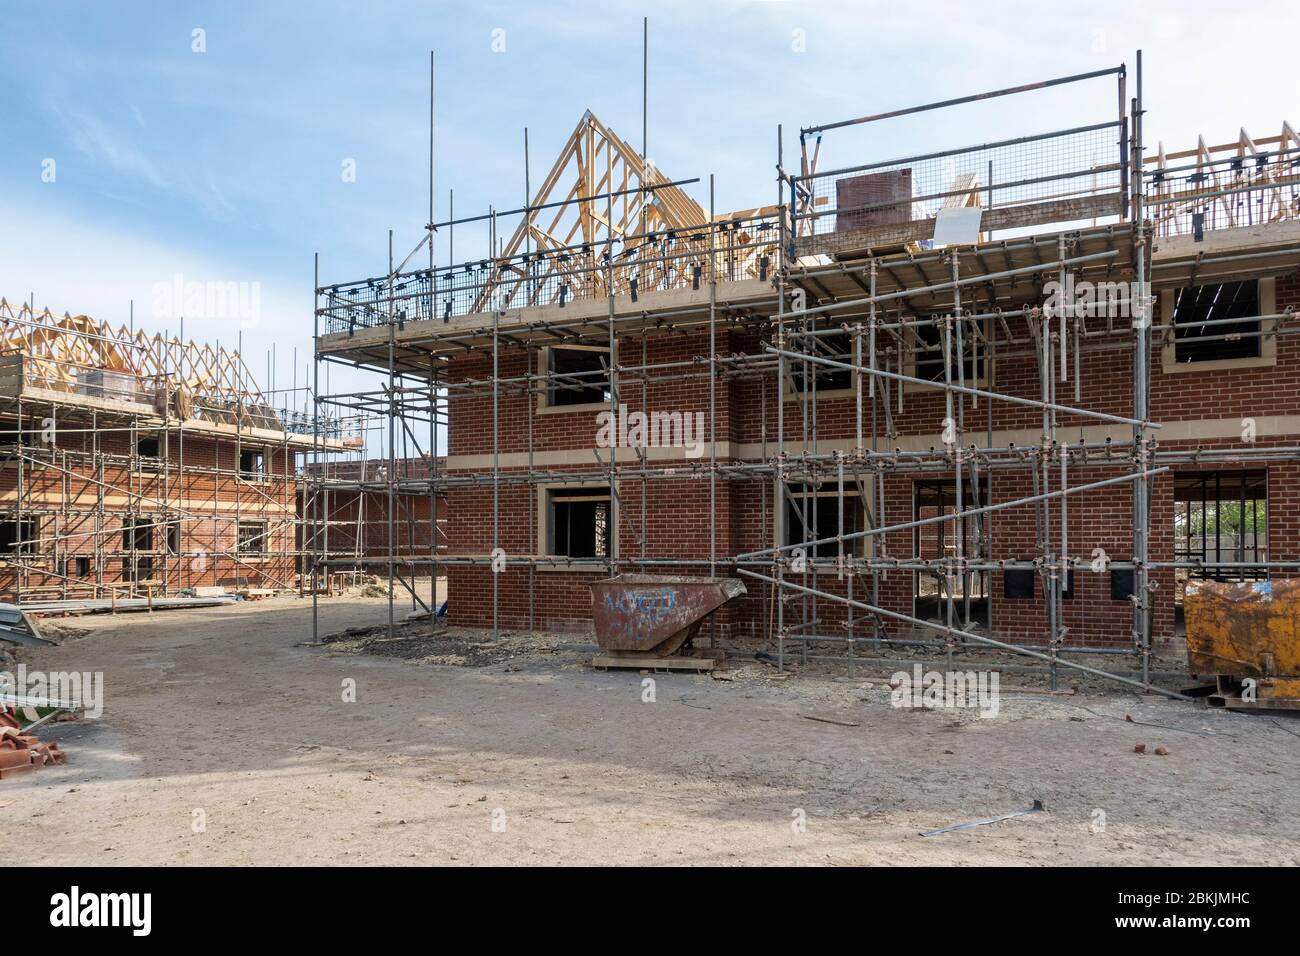 Brand new homes being built in Trowbridge, Wiltshire. Construction site closed during lockdown because of Coronavirus - Covid 19, England UK Stock Photo